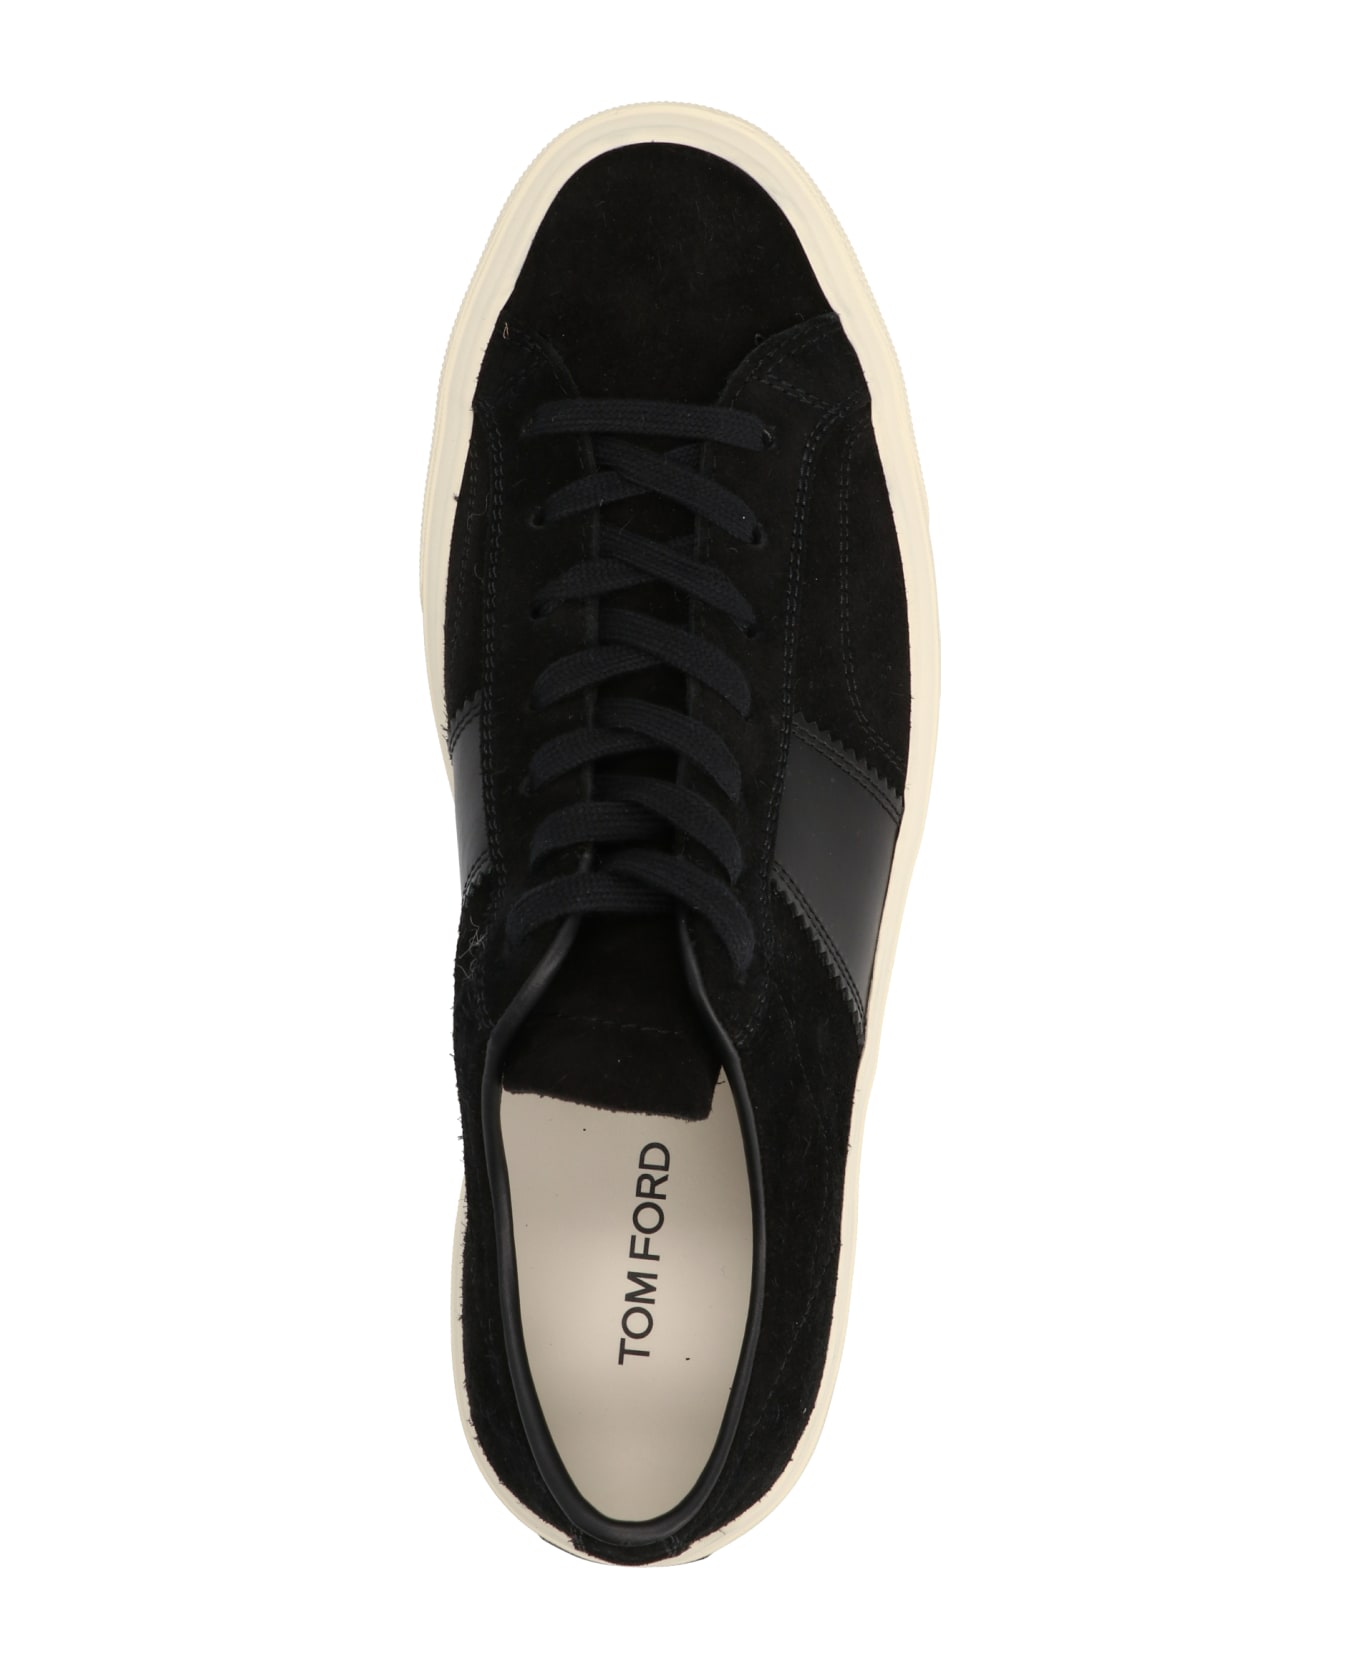 Tom Ford Suede Sneakers - BLACK CREAM